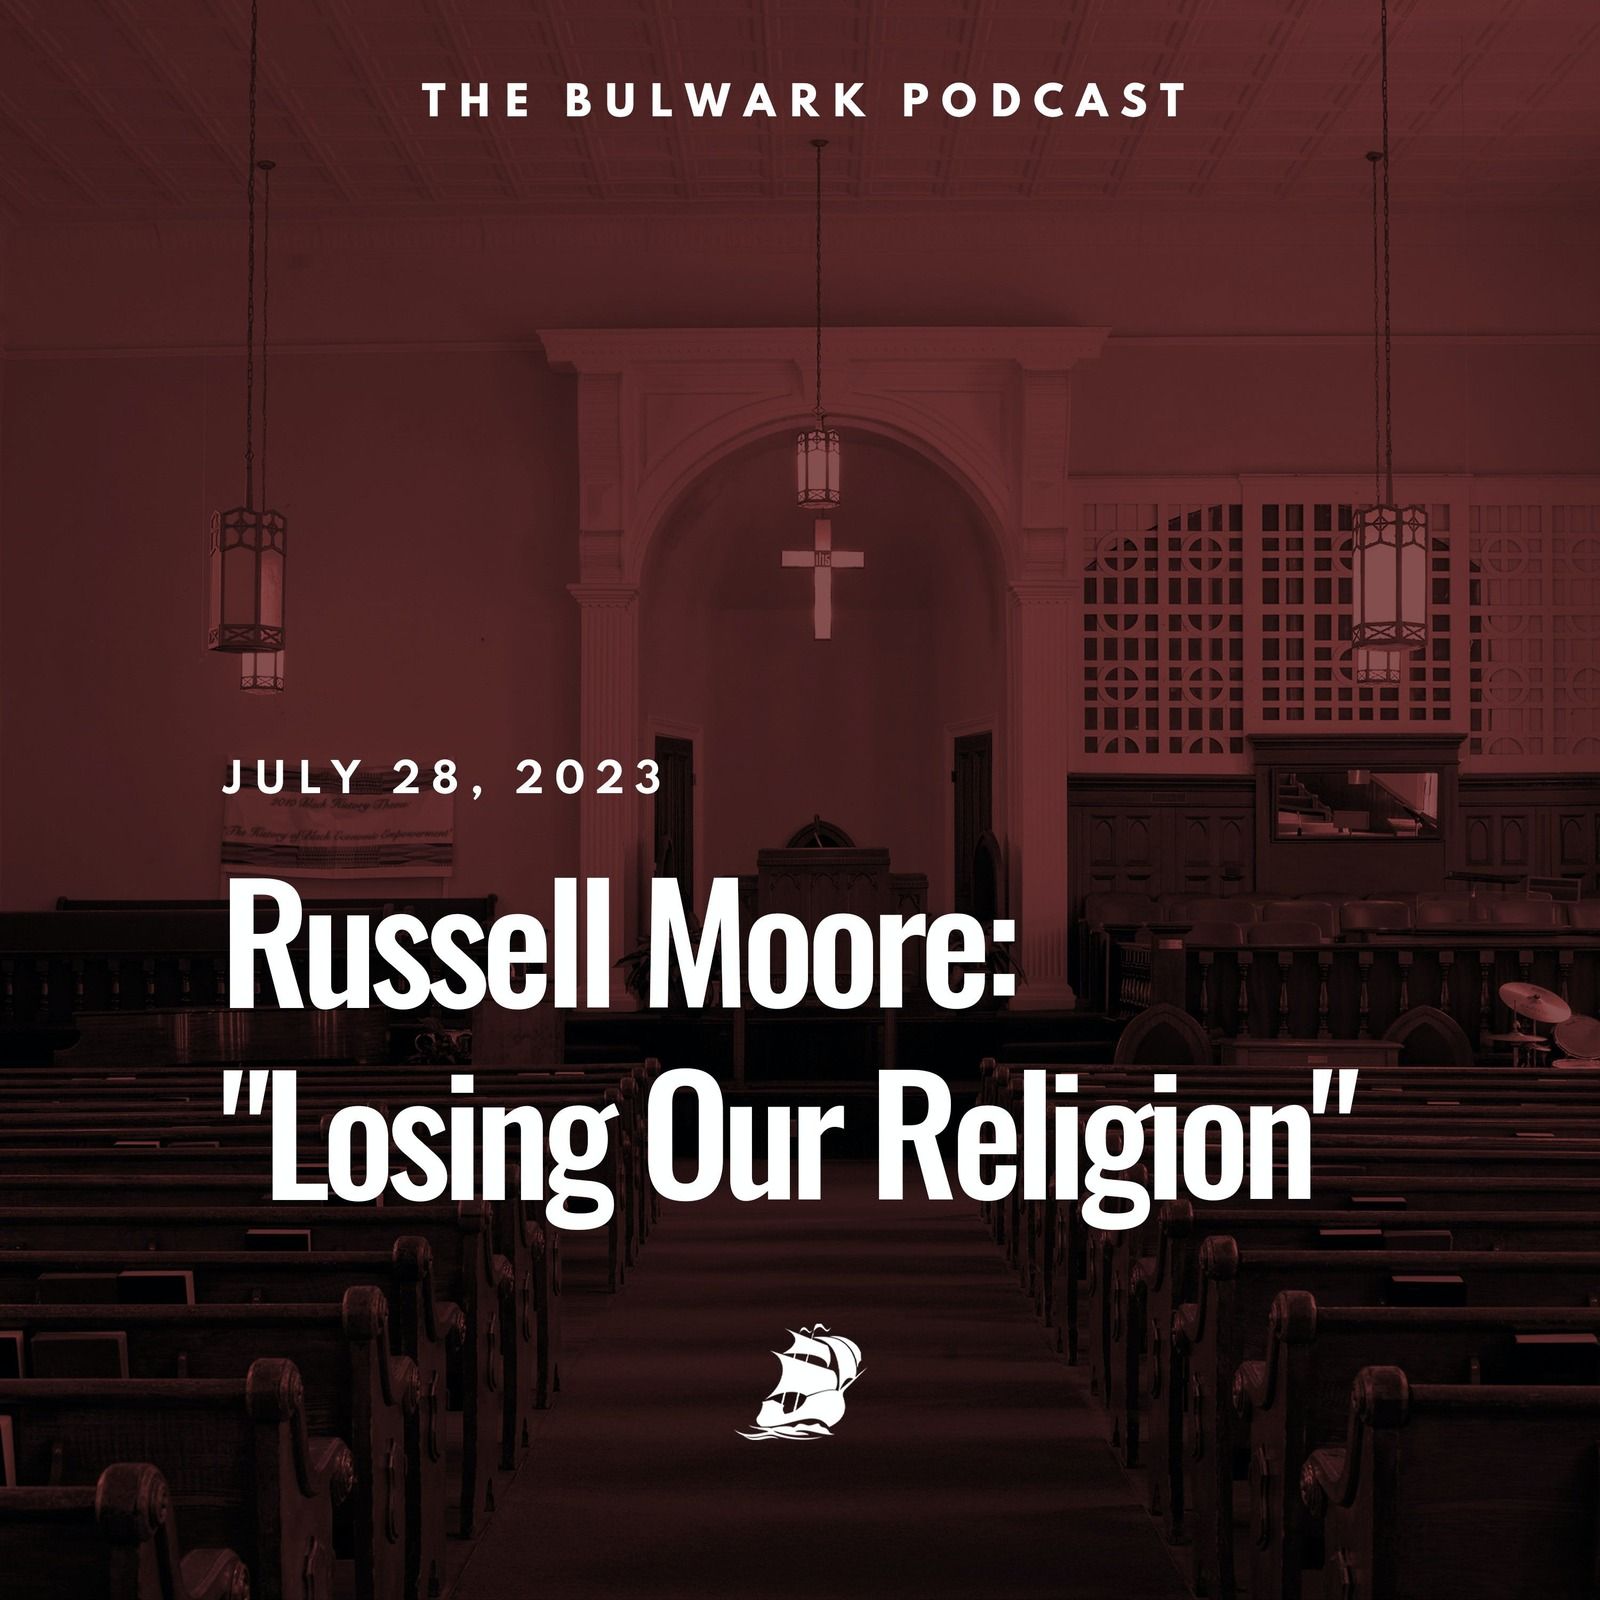 Russell Moore: "Losing Our Religion" by The Bulwark Podcast